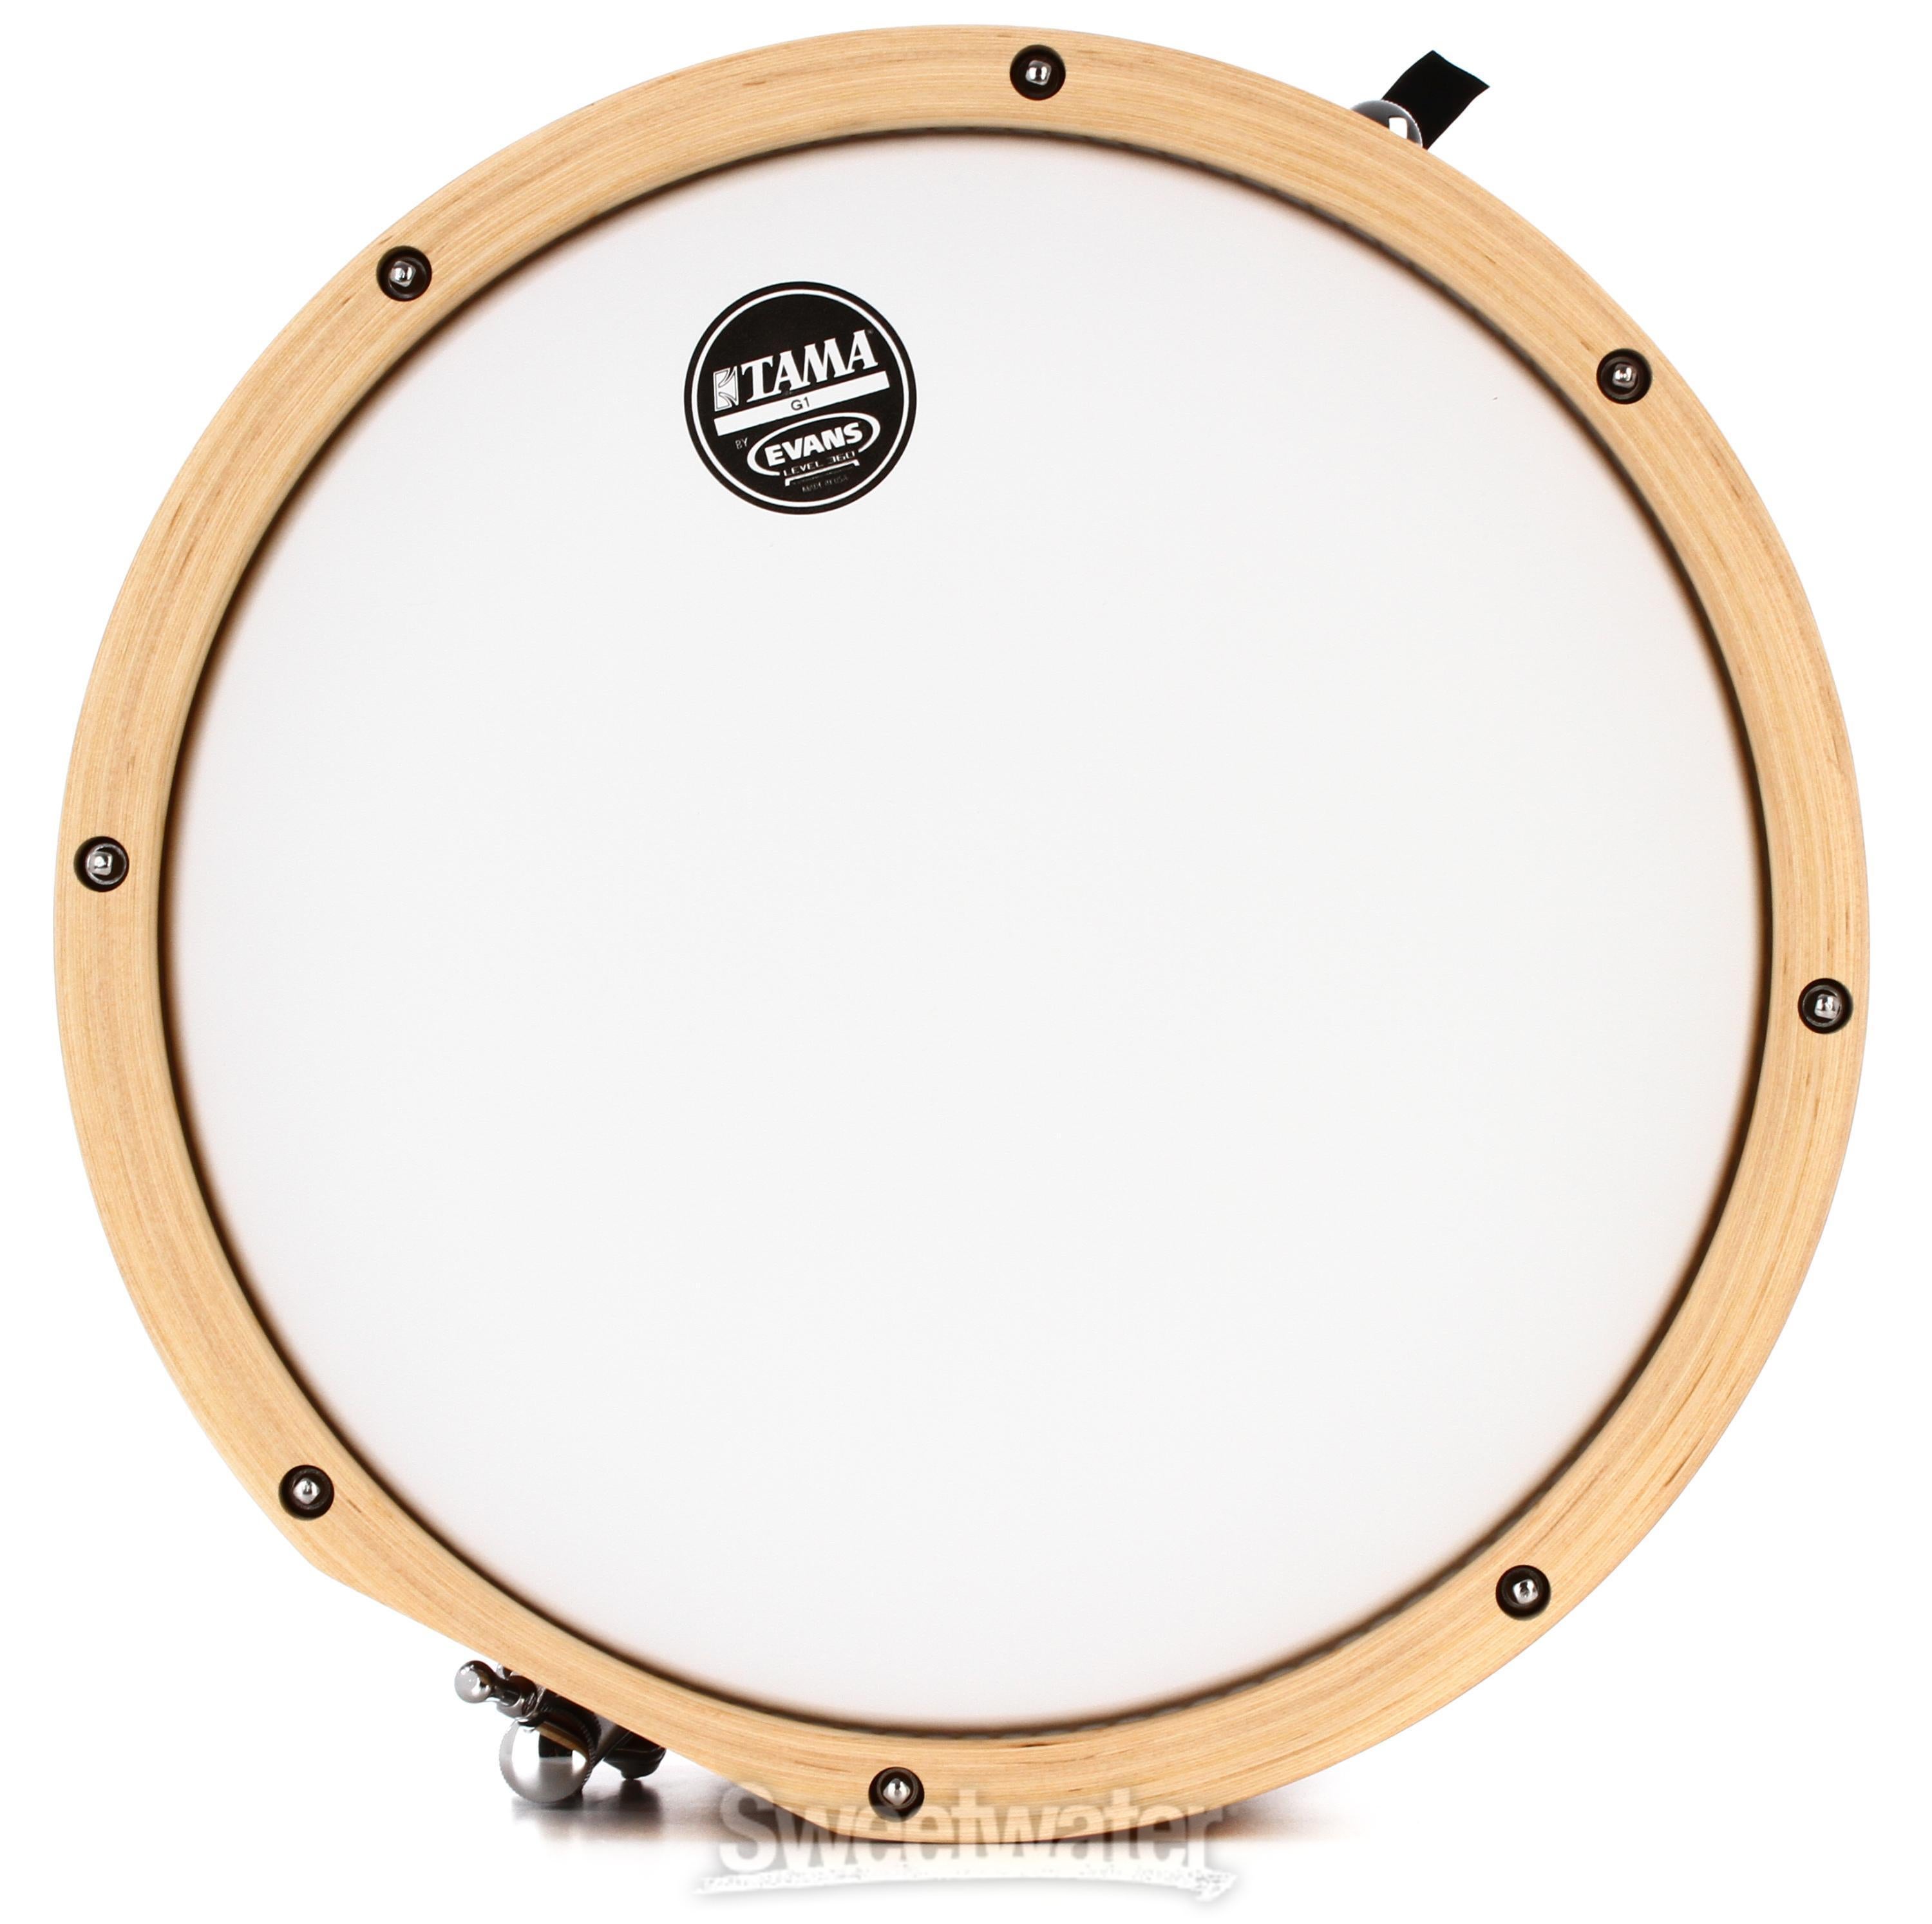 Tama S.L.P. Studio Maple Snare Drum - 6.5 x 14 inch - Sienna | Sweetwater